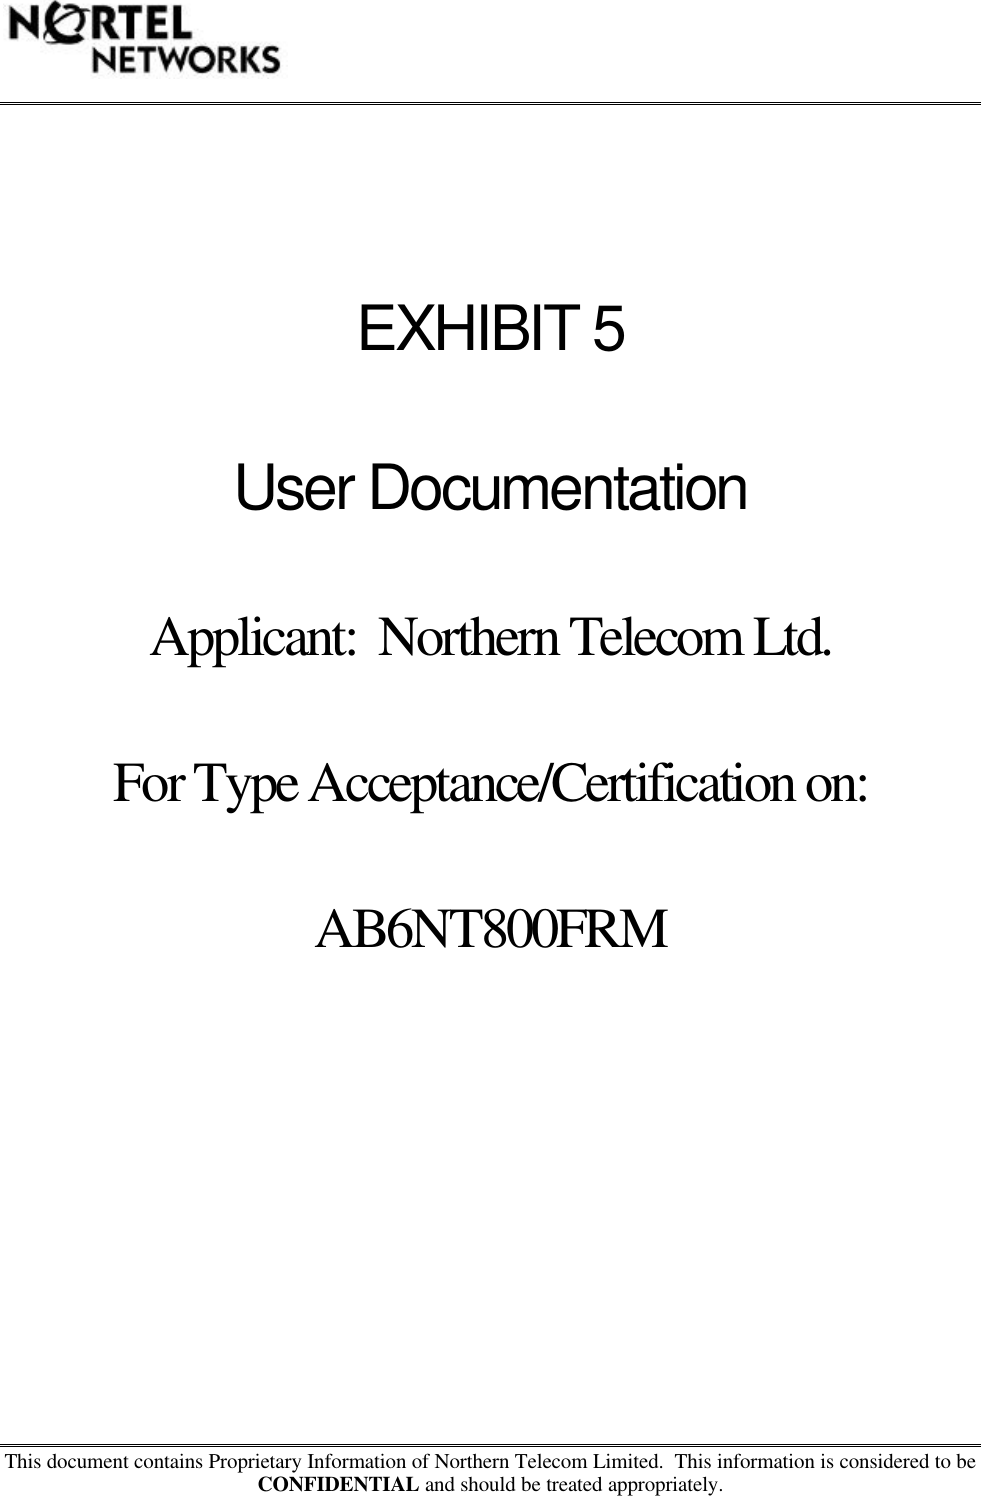 This document contains Proprietary Information of Northern Telecom Limited.  This information is considered to beCONFIDENTIAL and should be treated appropriately.EXHIBIT 5User DocumentationApplicant:  Northern Telecom Ltd.For Type Acceptance/Certification on:AB6NT800FRM